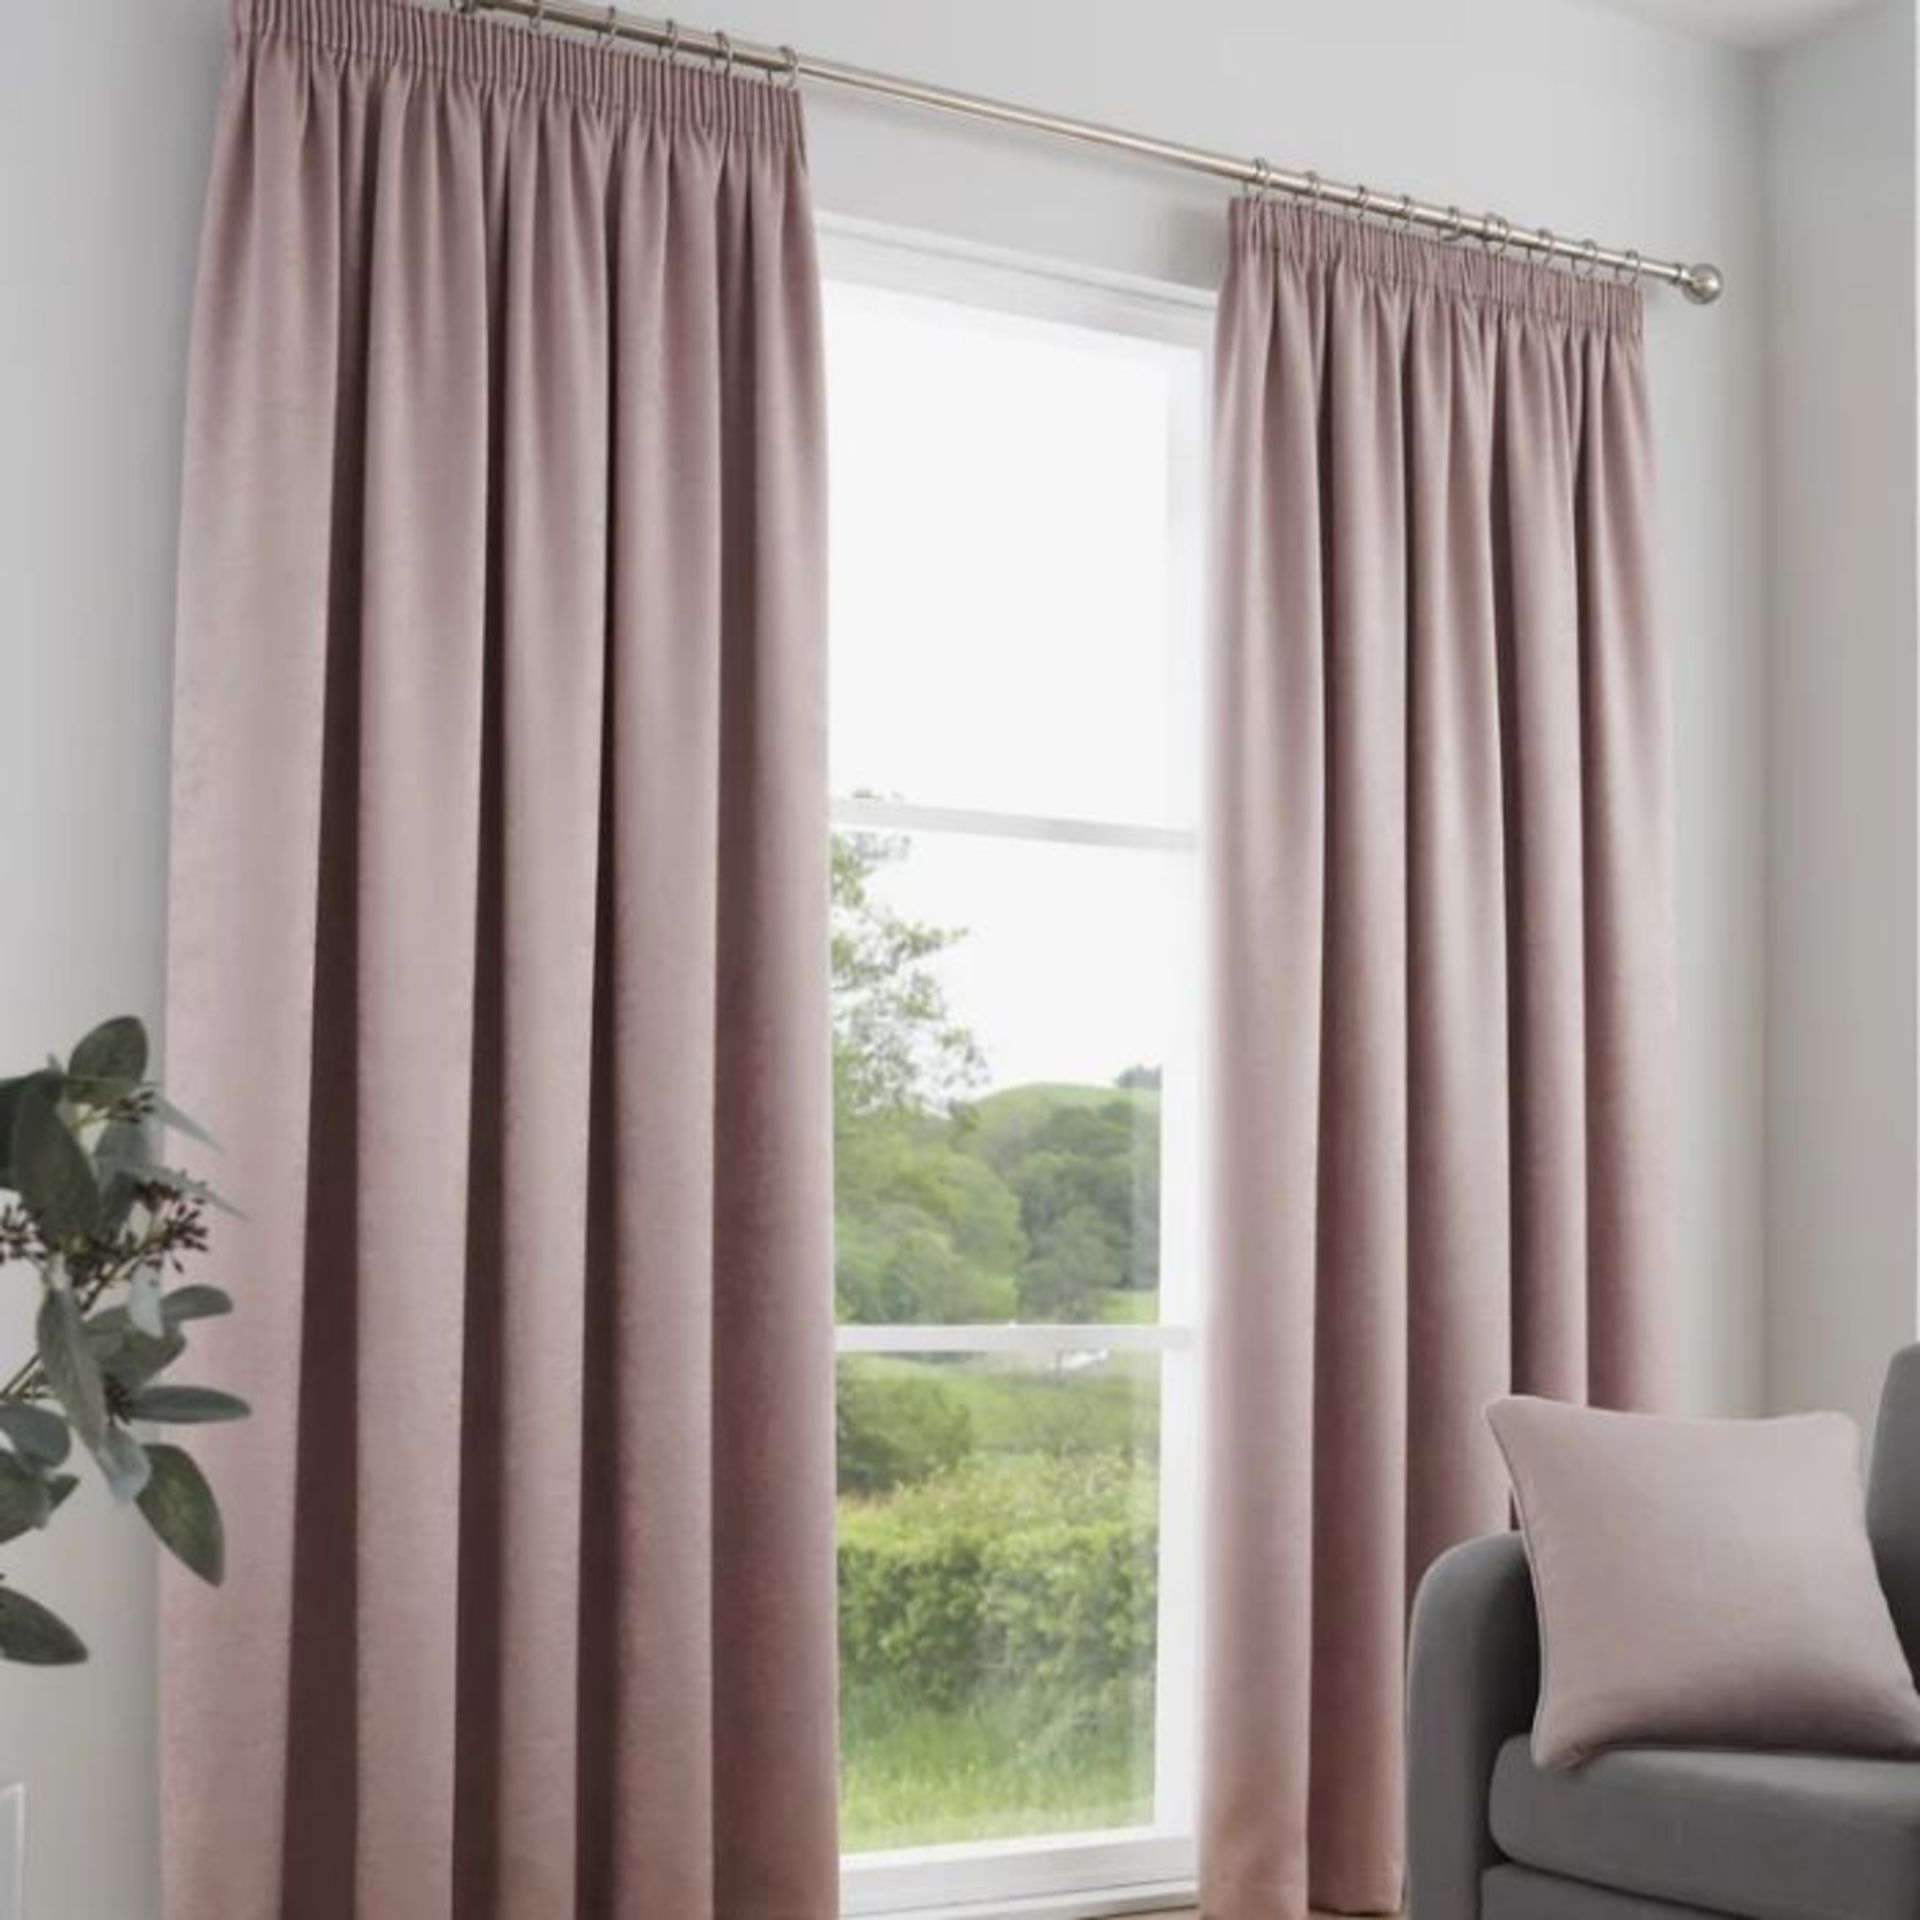 Ebern Designs, Carianna Self Lined Pair Of Eyelet Curtains By Ebern Designs (BLUSH) (168 W x 137 D - Image 4 of 4